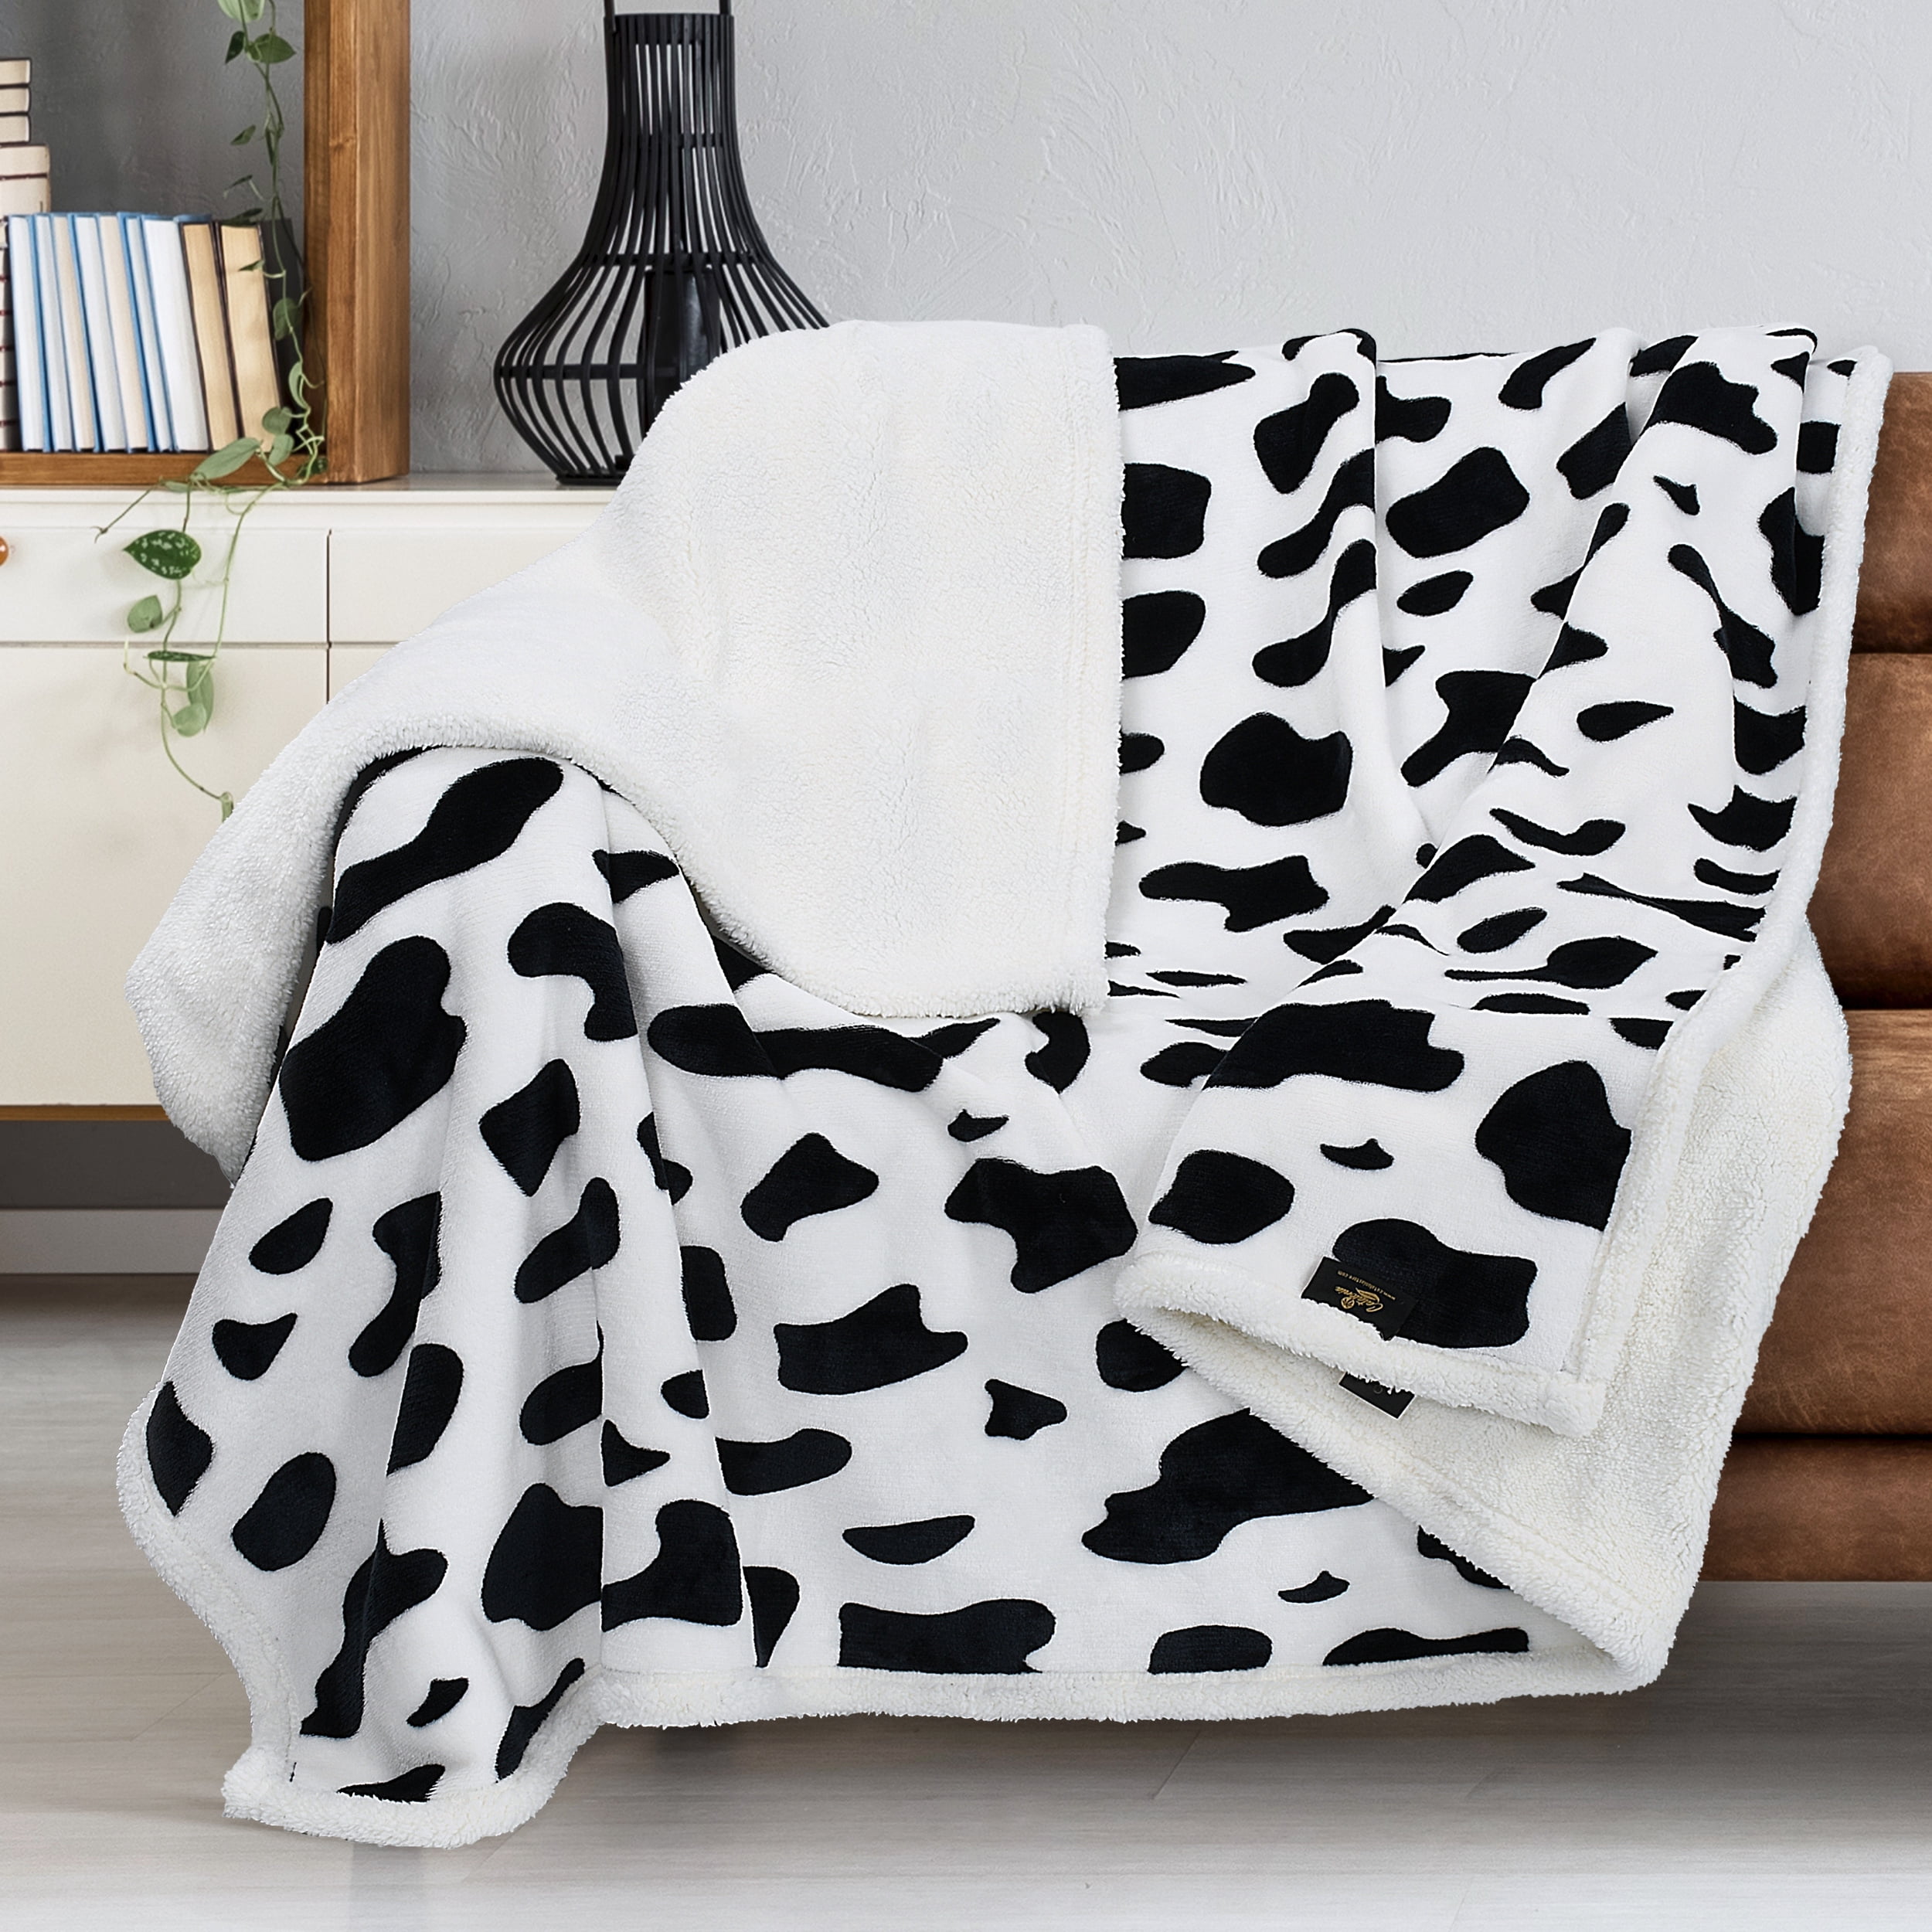 Blanket Happy Cute Little Baby Cows Flannel Fleece Throw Blankets for Baby Kids Men Women,Soft Warm Blankets Queen Size and Throws for Couch Bed Travel Sofa-50